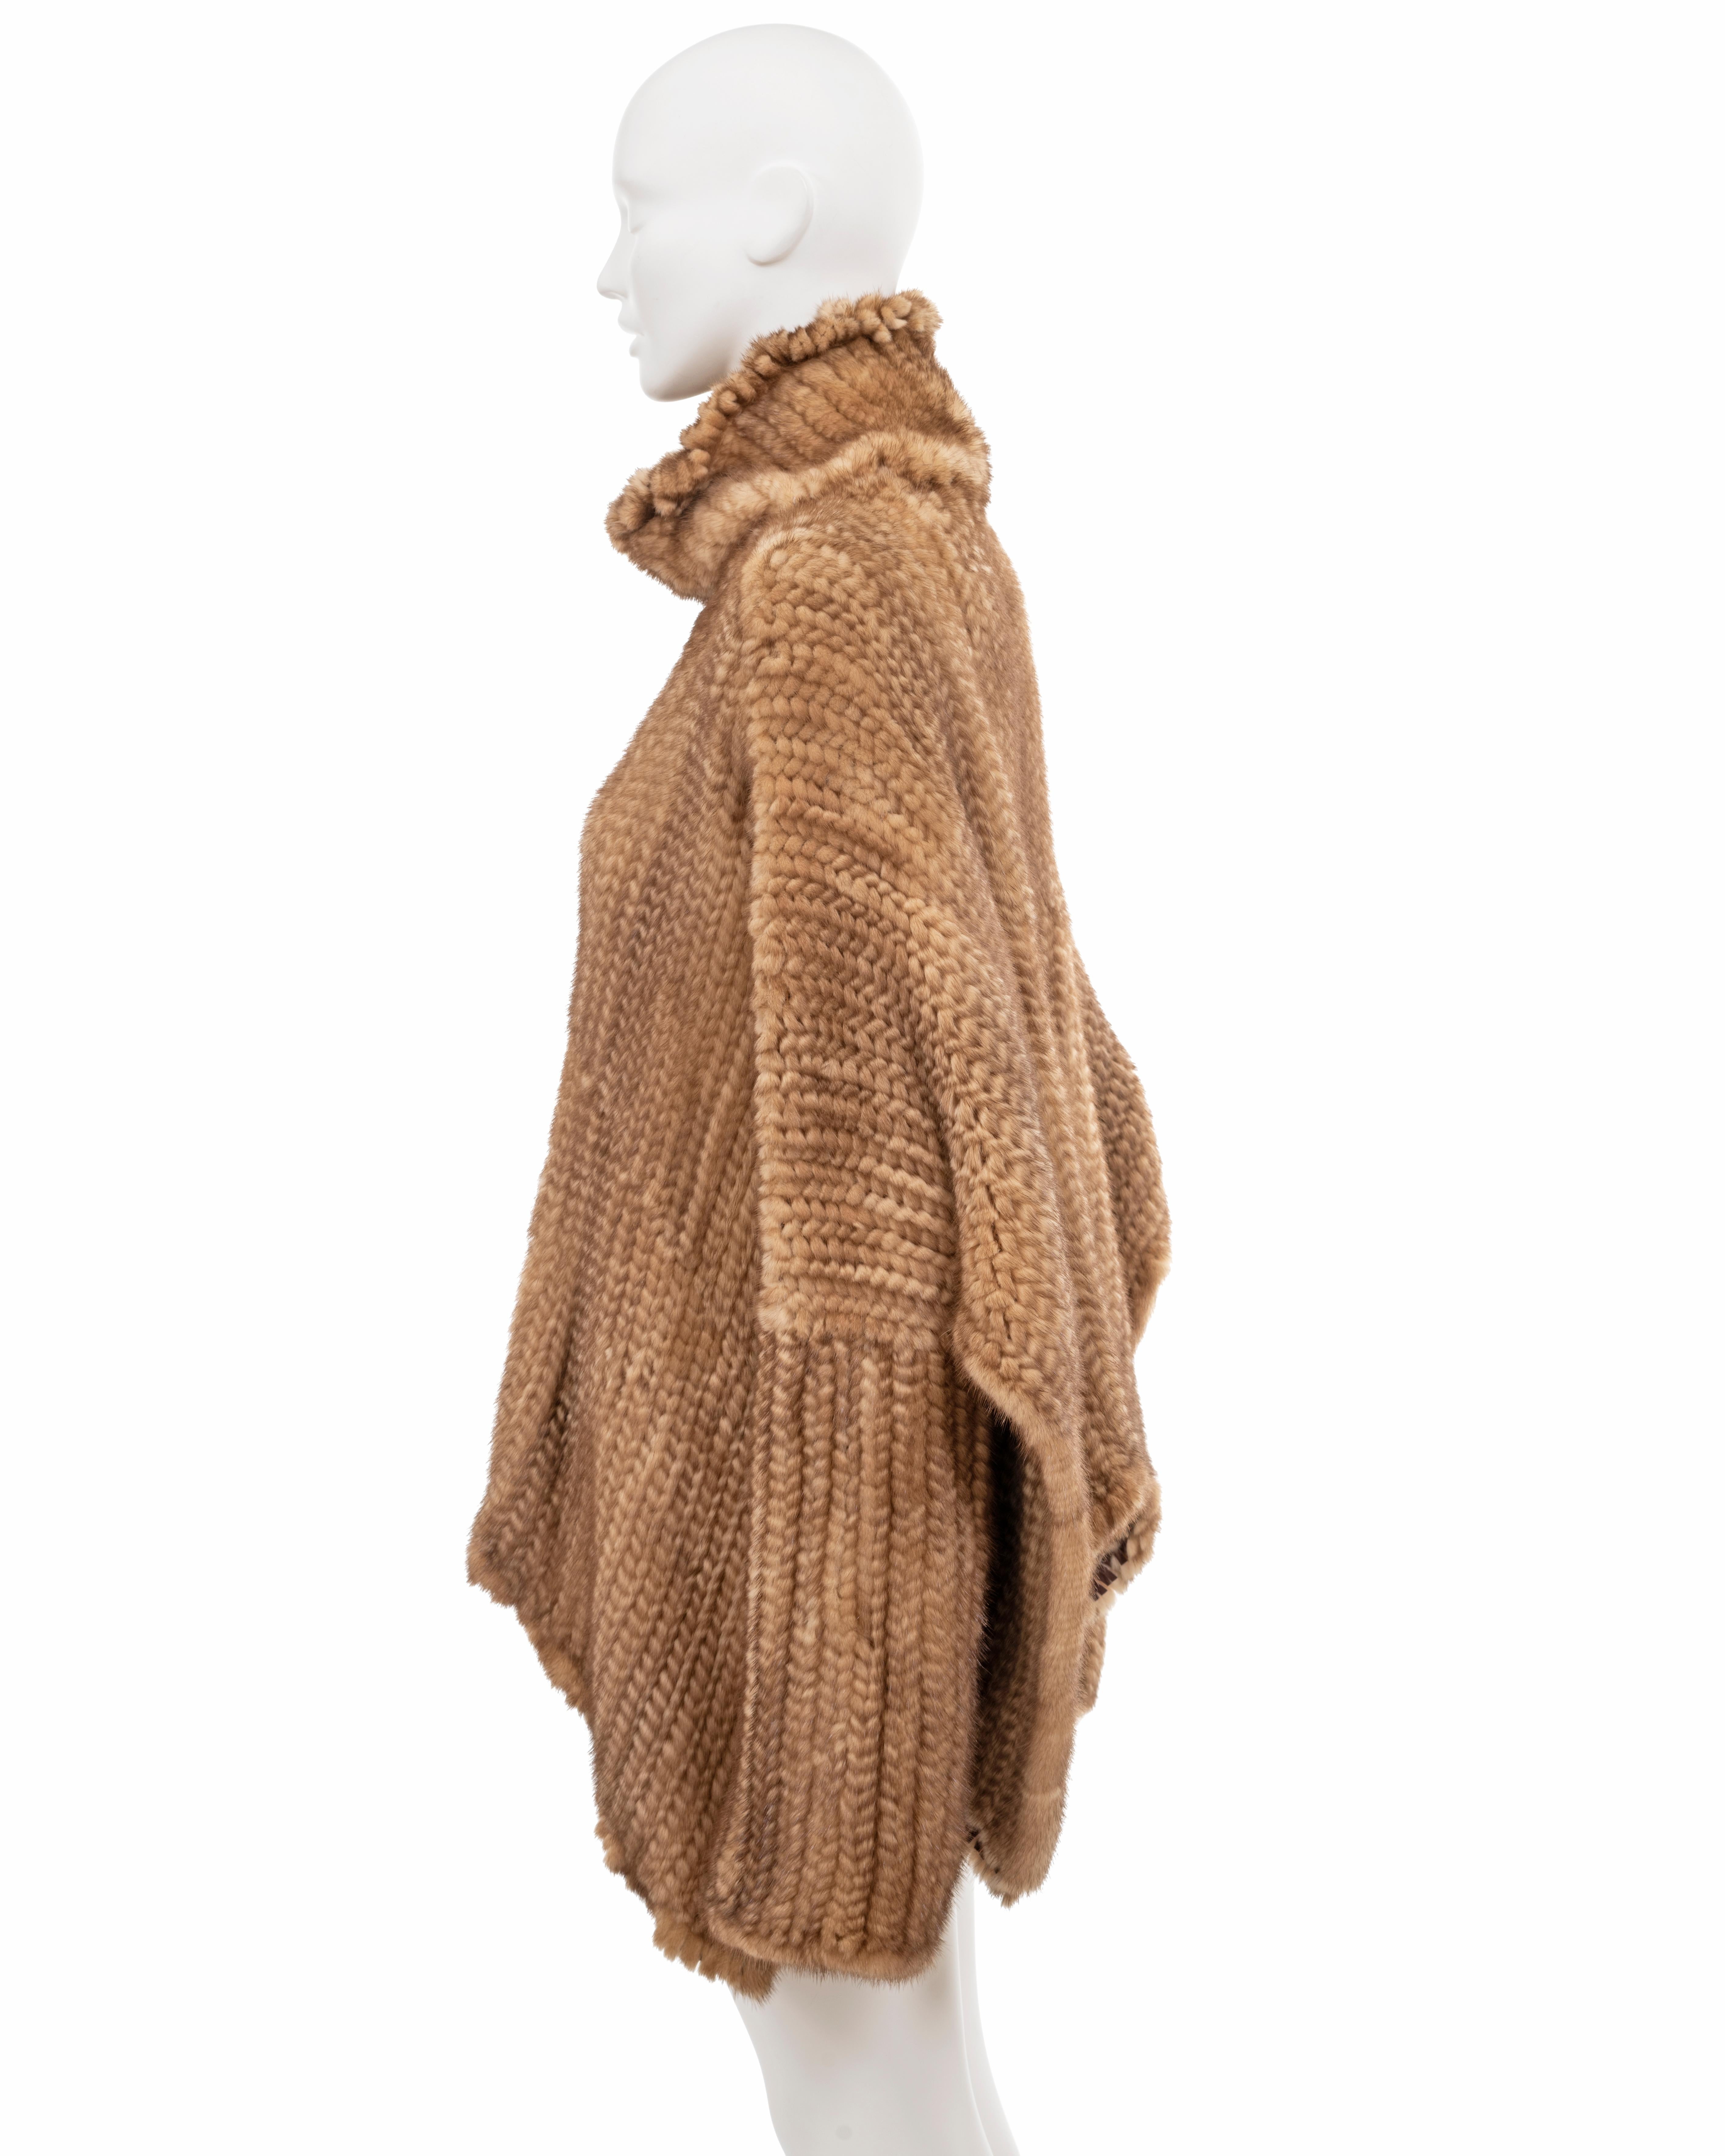 Christian Dior by John Galliano knitted mink fur oversized sweater, fw 2000 For Sale 1